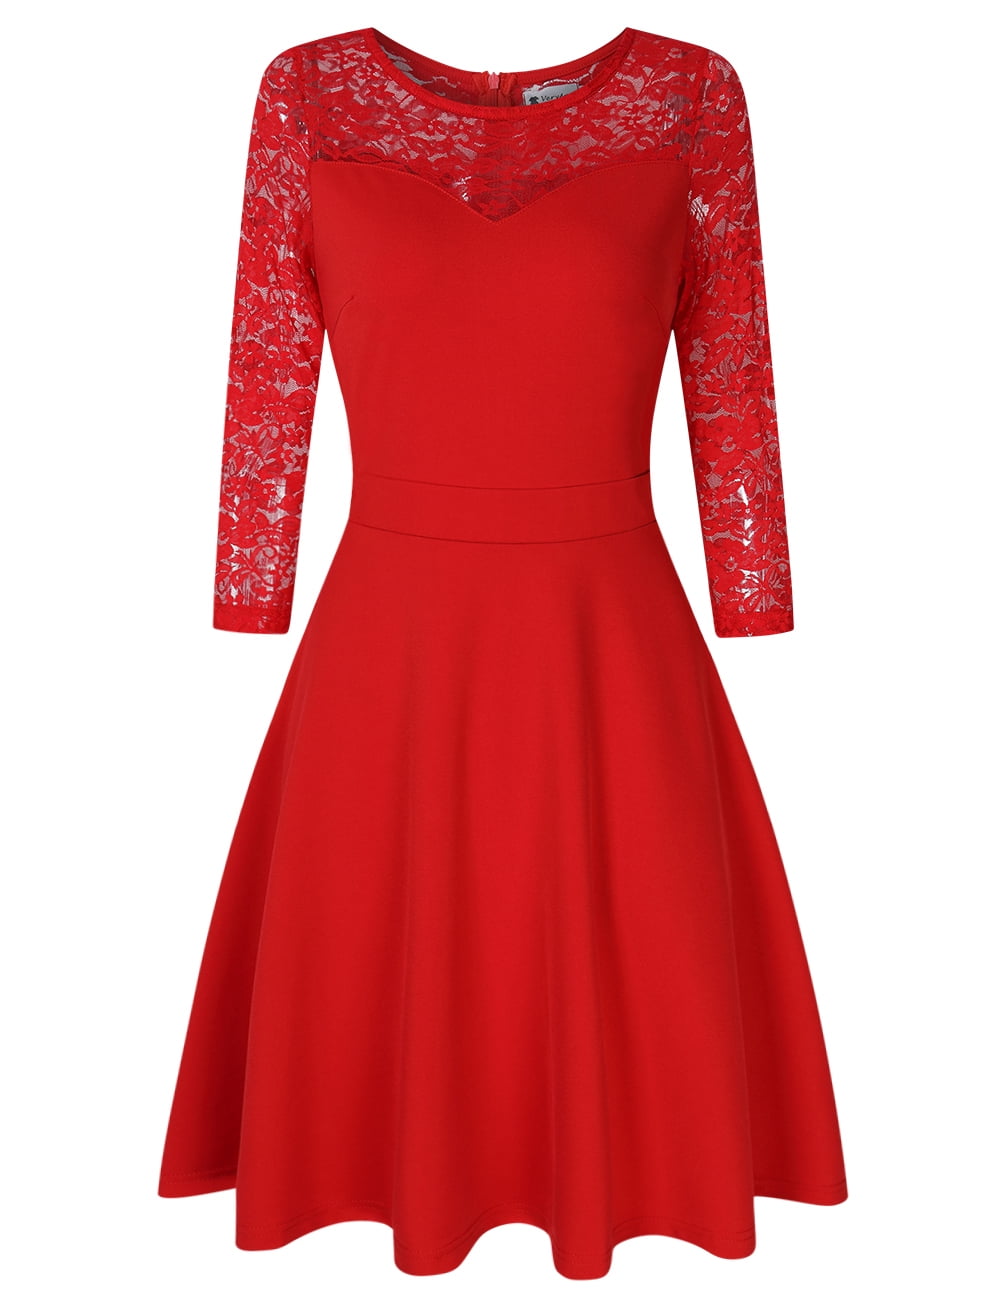 AKDSteel - VeryAnn Women A Line Cocktail Dress Empire Lace Fit and ...